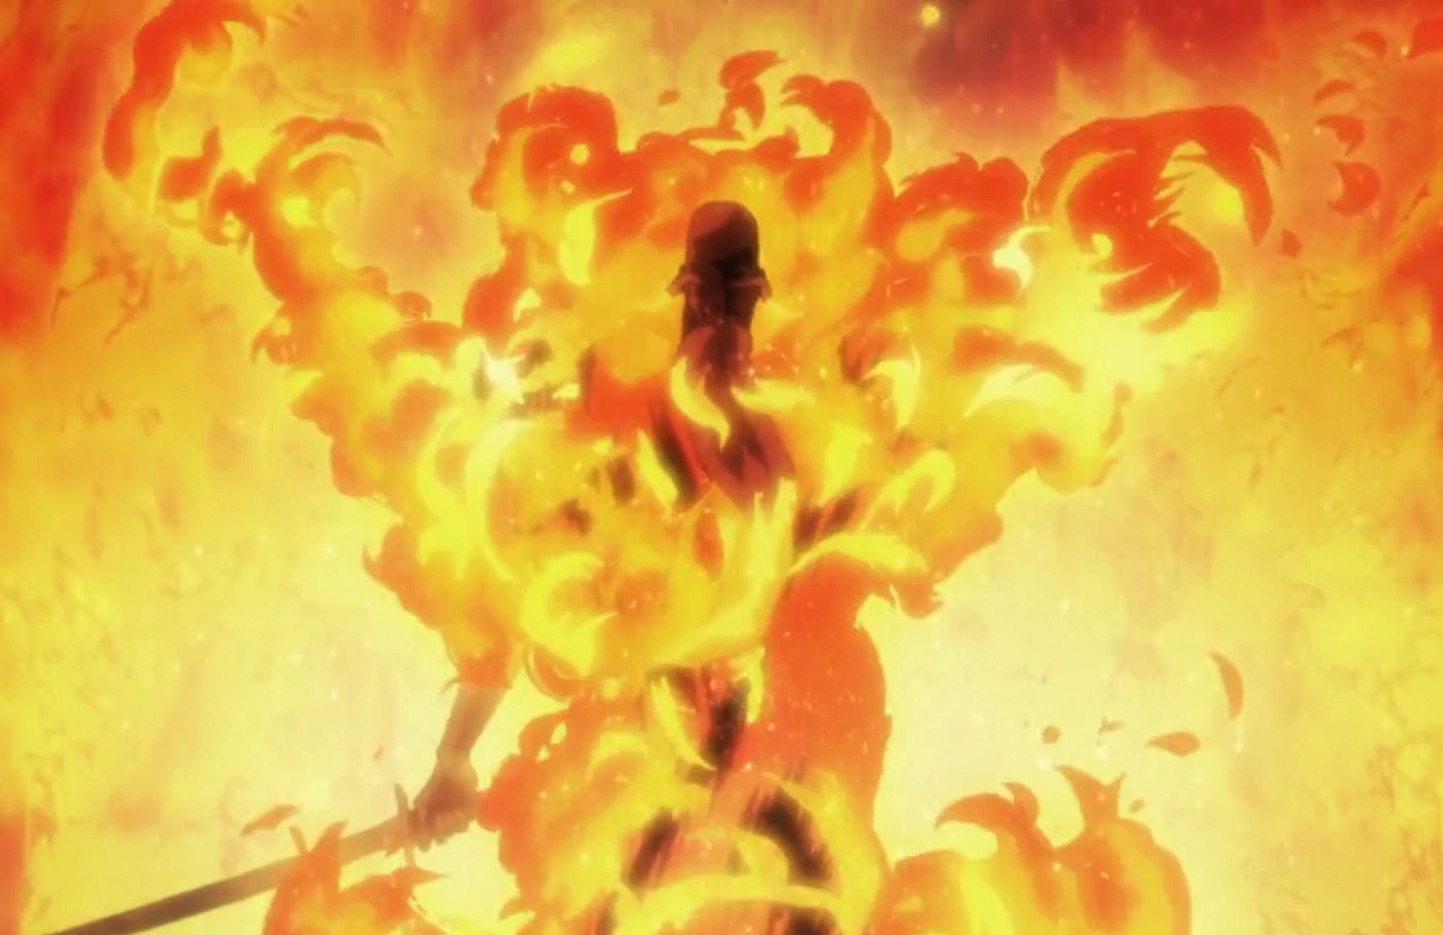 Bleach Thousand Year Blood War Episode 6 Review: Through The Fire And  Flames